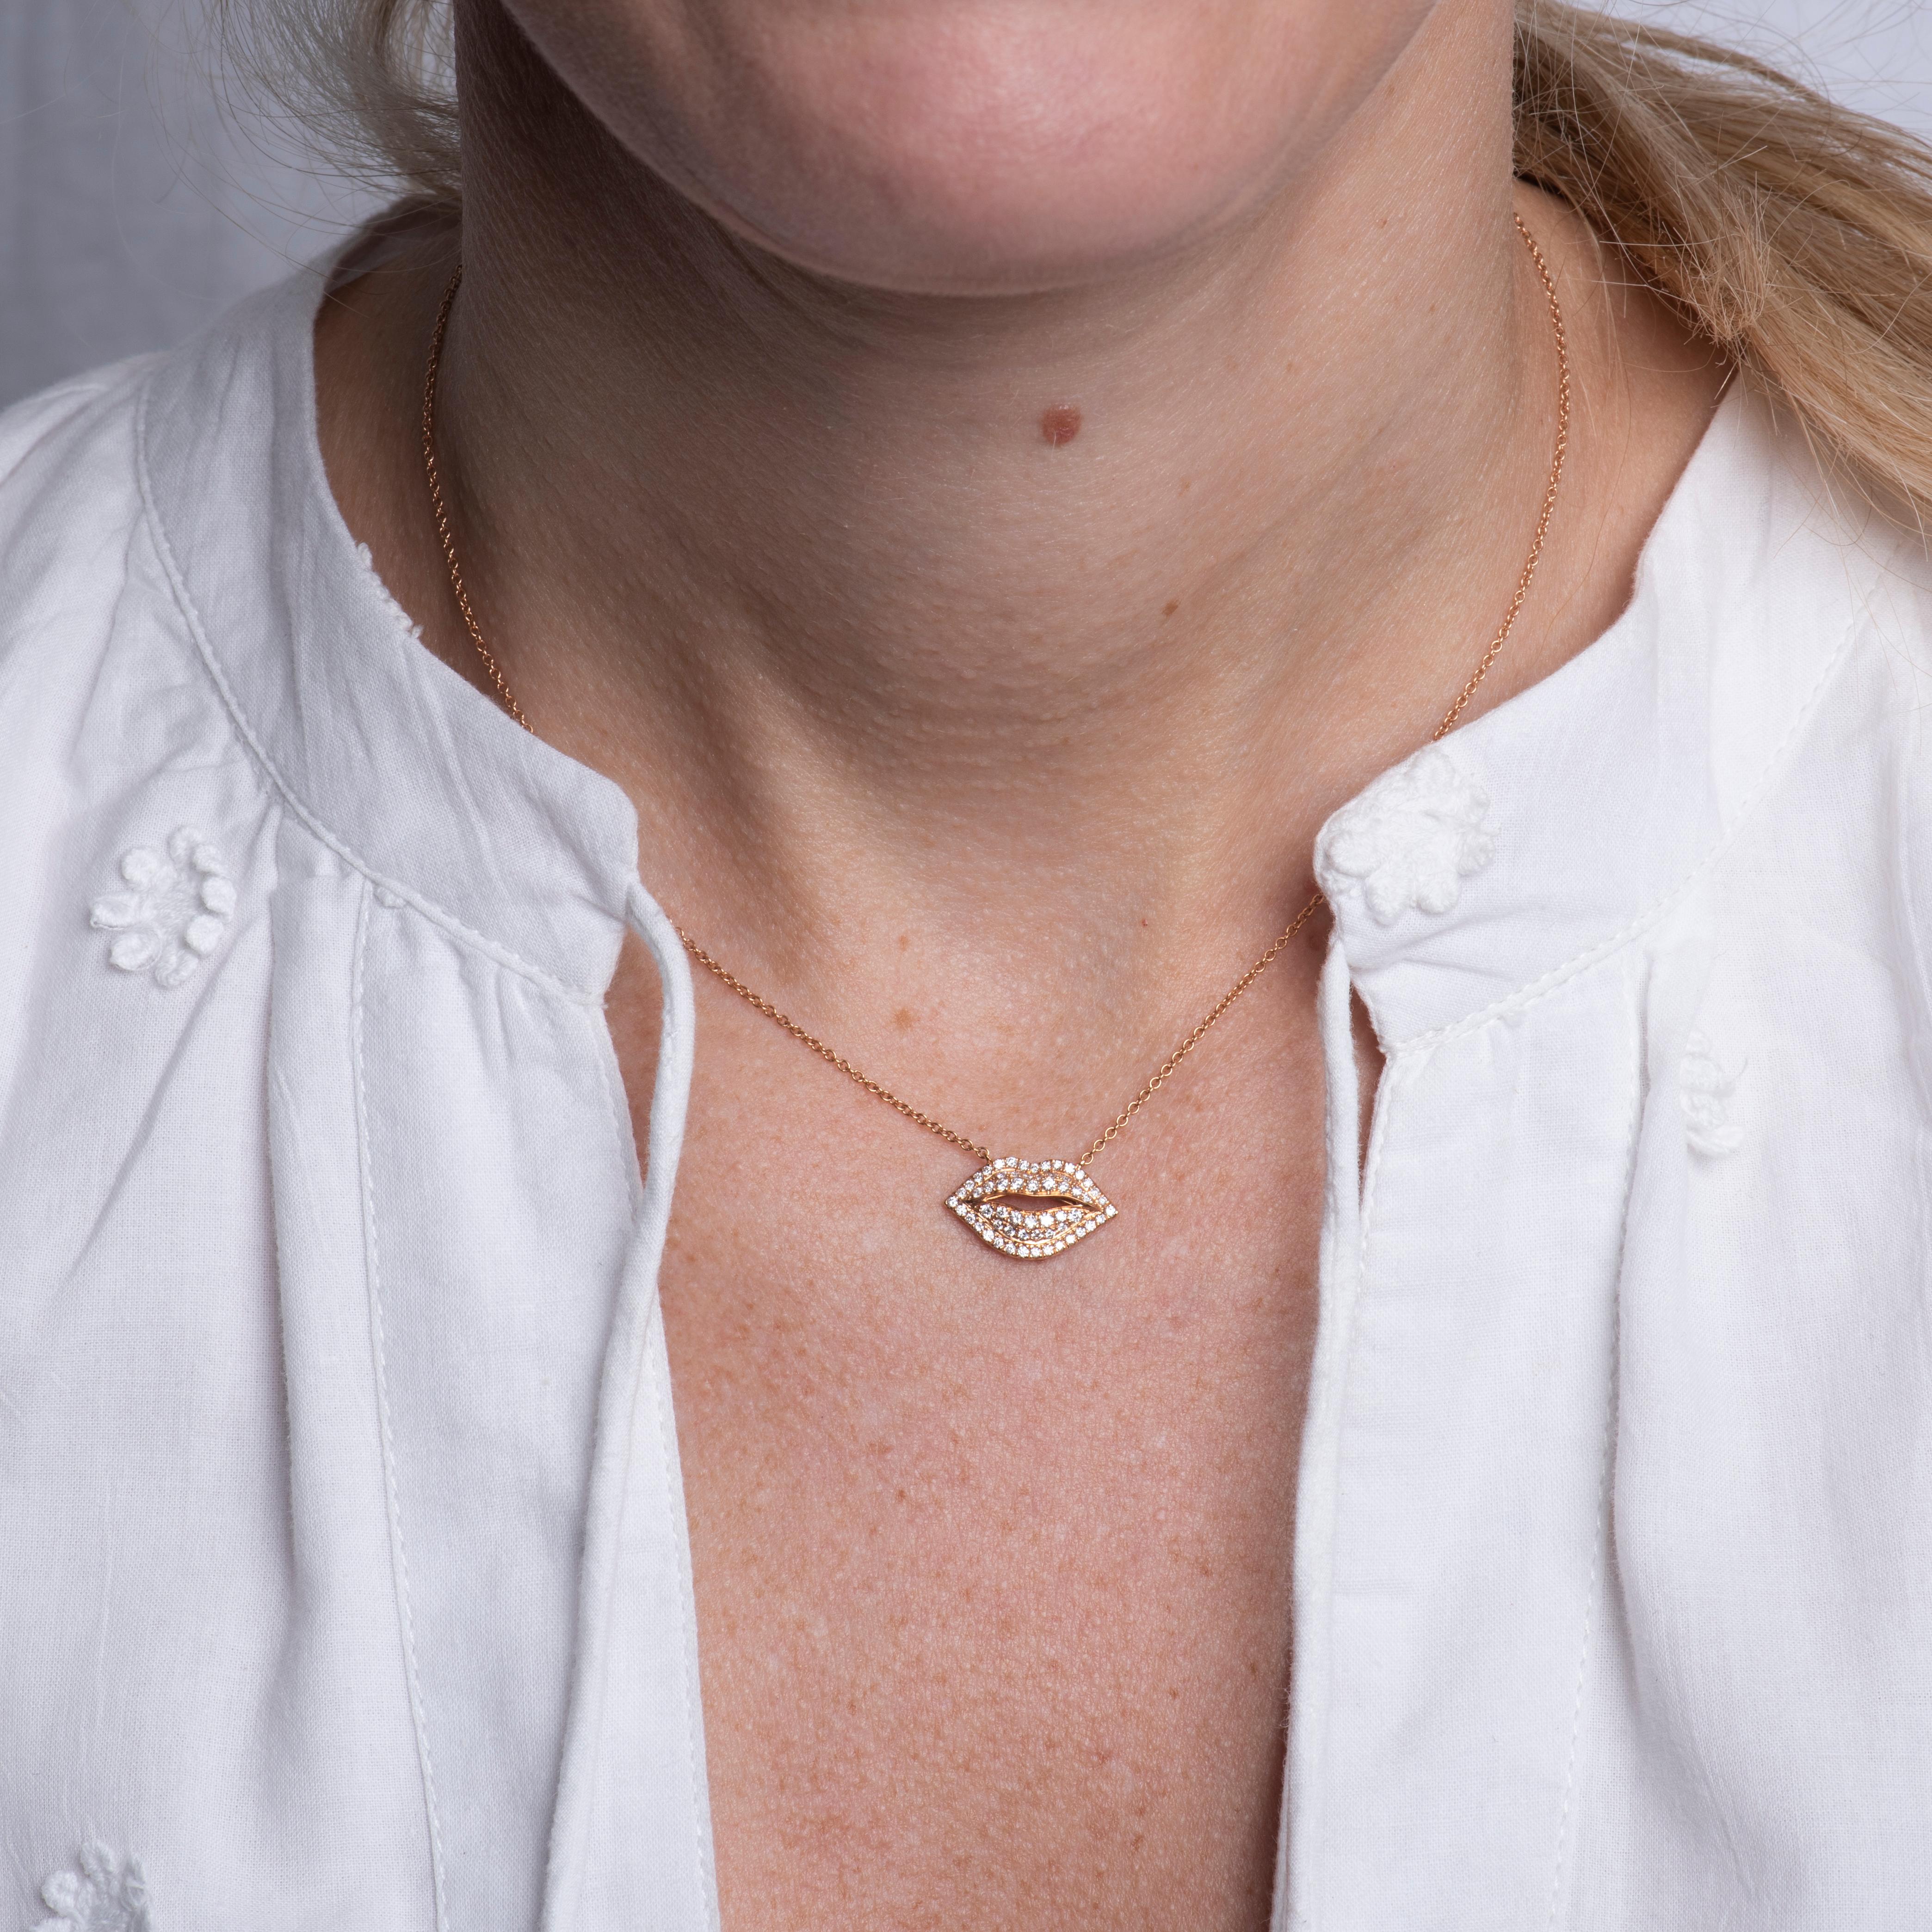 This unique pendant necklace features a set of lips set with 0.35 carat total weight in round diamonds. It is set in 18 karat rose gold on an 18 karat rose gold adjustable chain. Lobster clasp closure. Wear alone or layer with other necklaces for